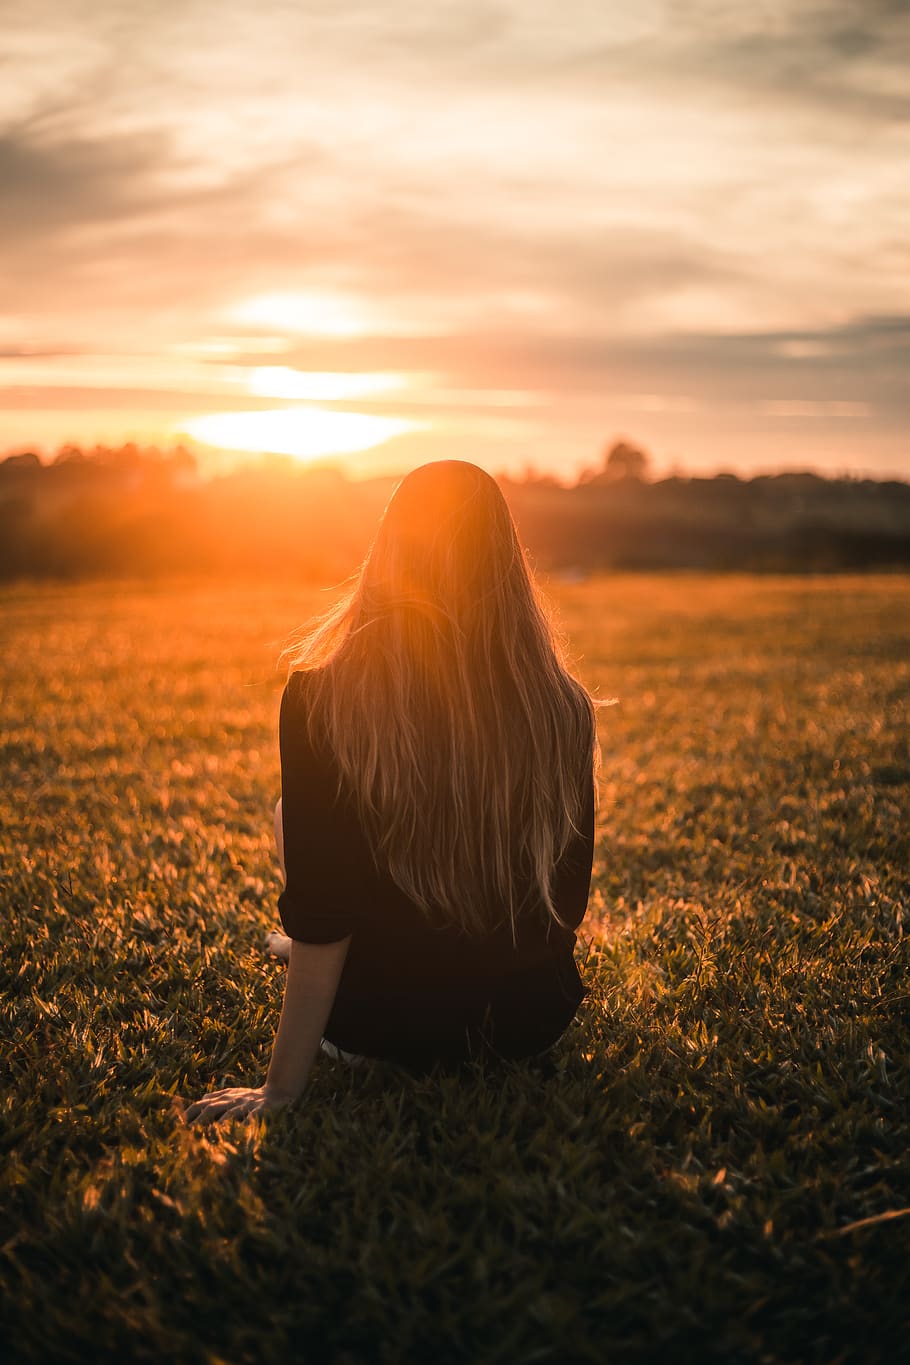 Woman in Black Shirt Sitting on Grass during Sunset, back view